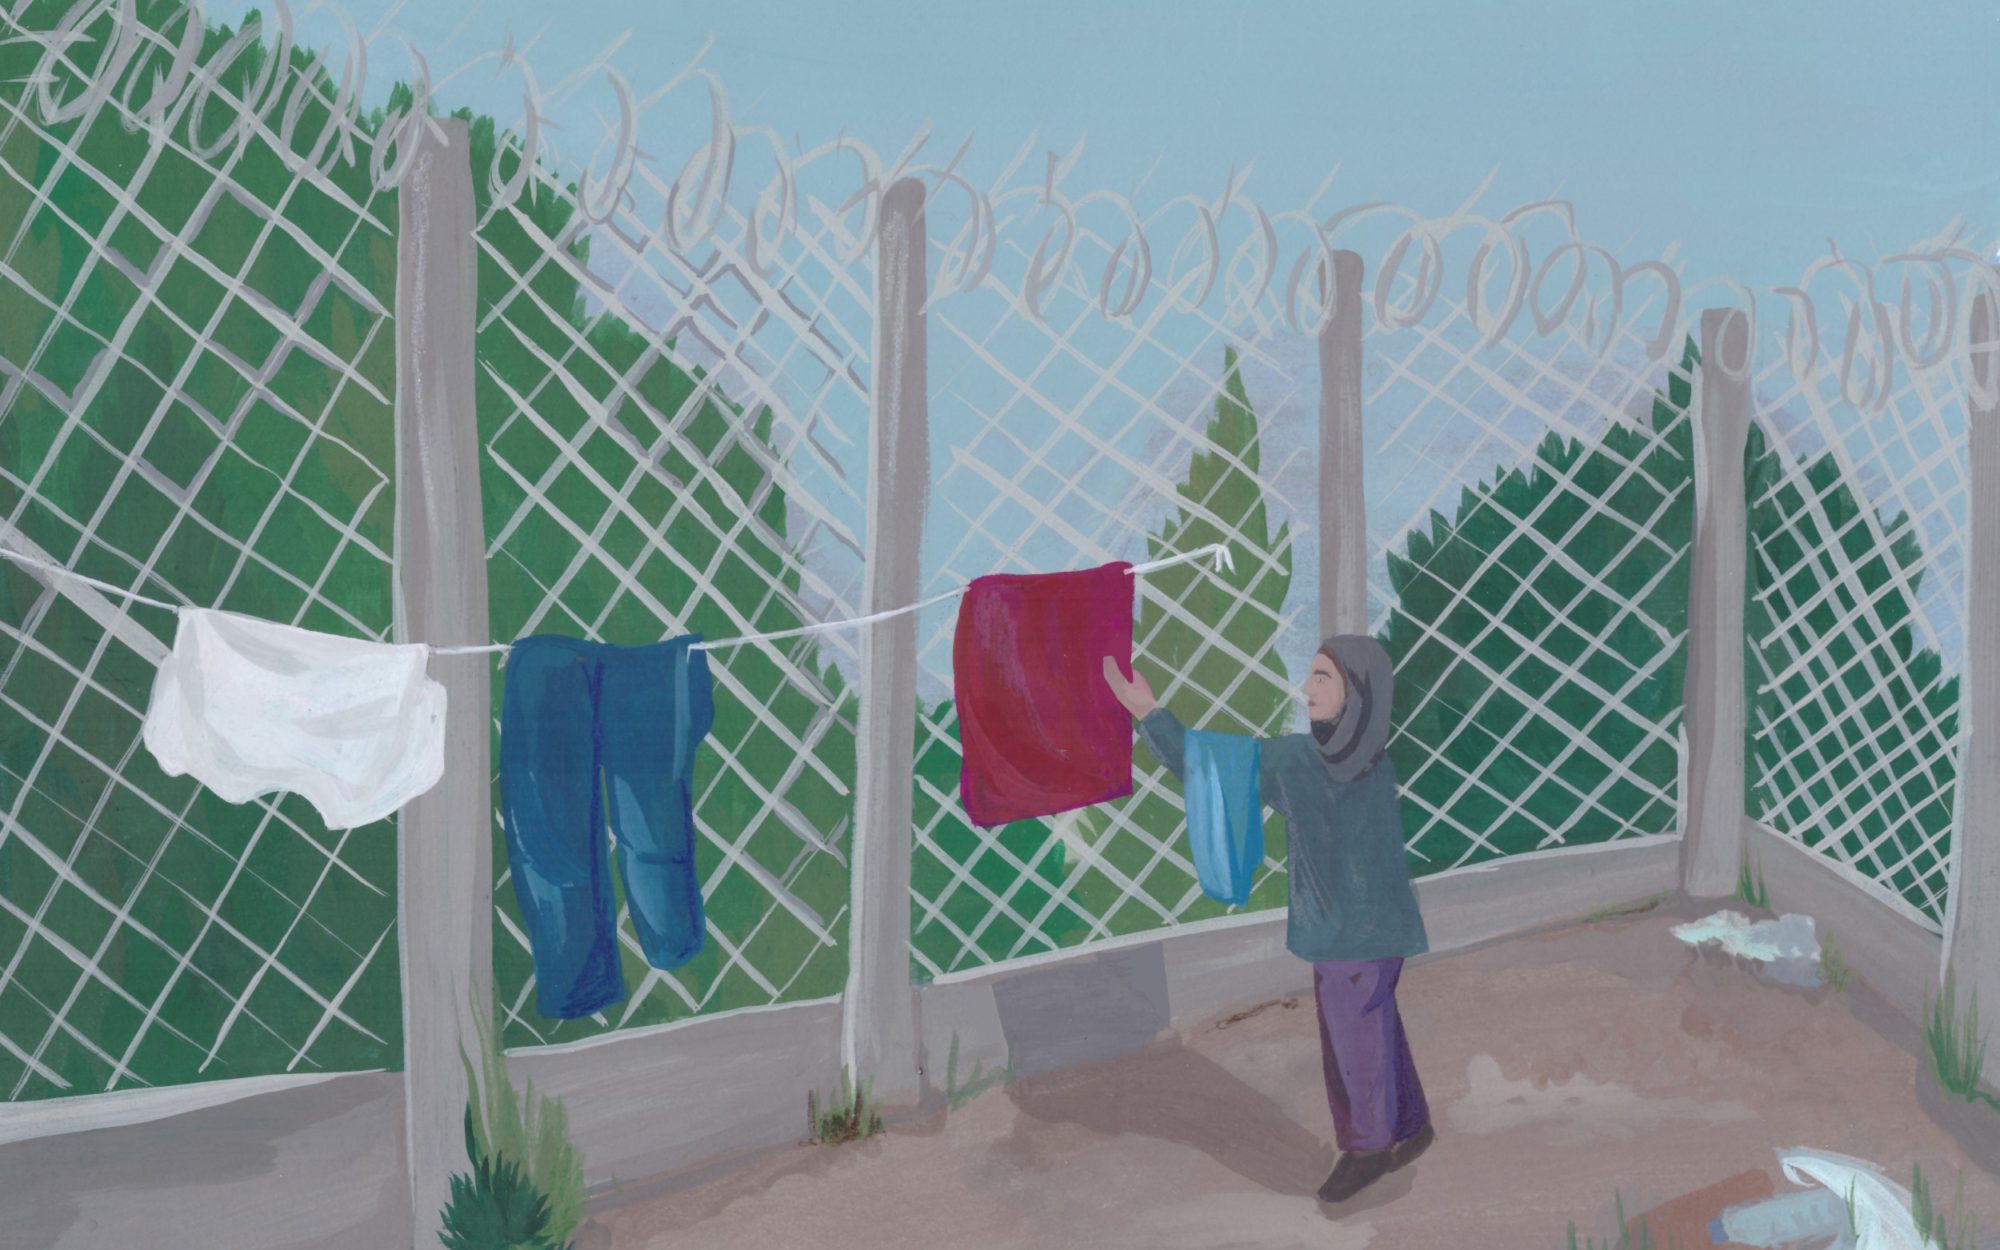 Painting of refugee woman hanging clothes in refugee camp against barbed wire fence